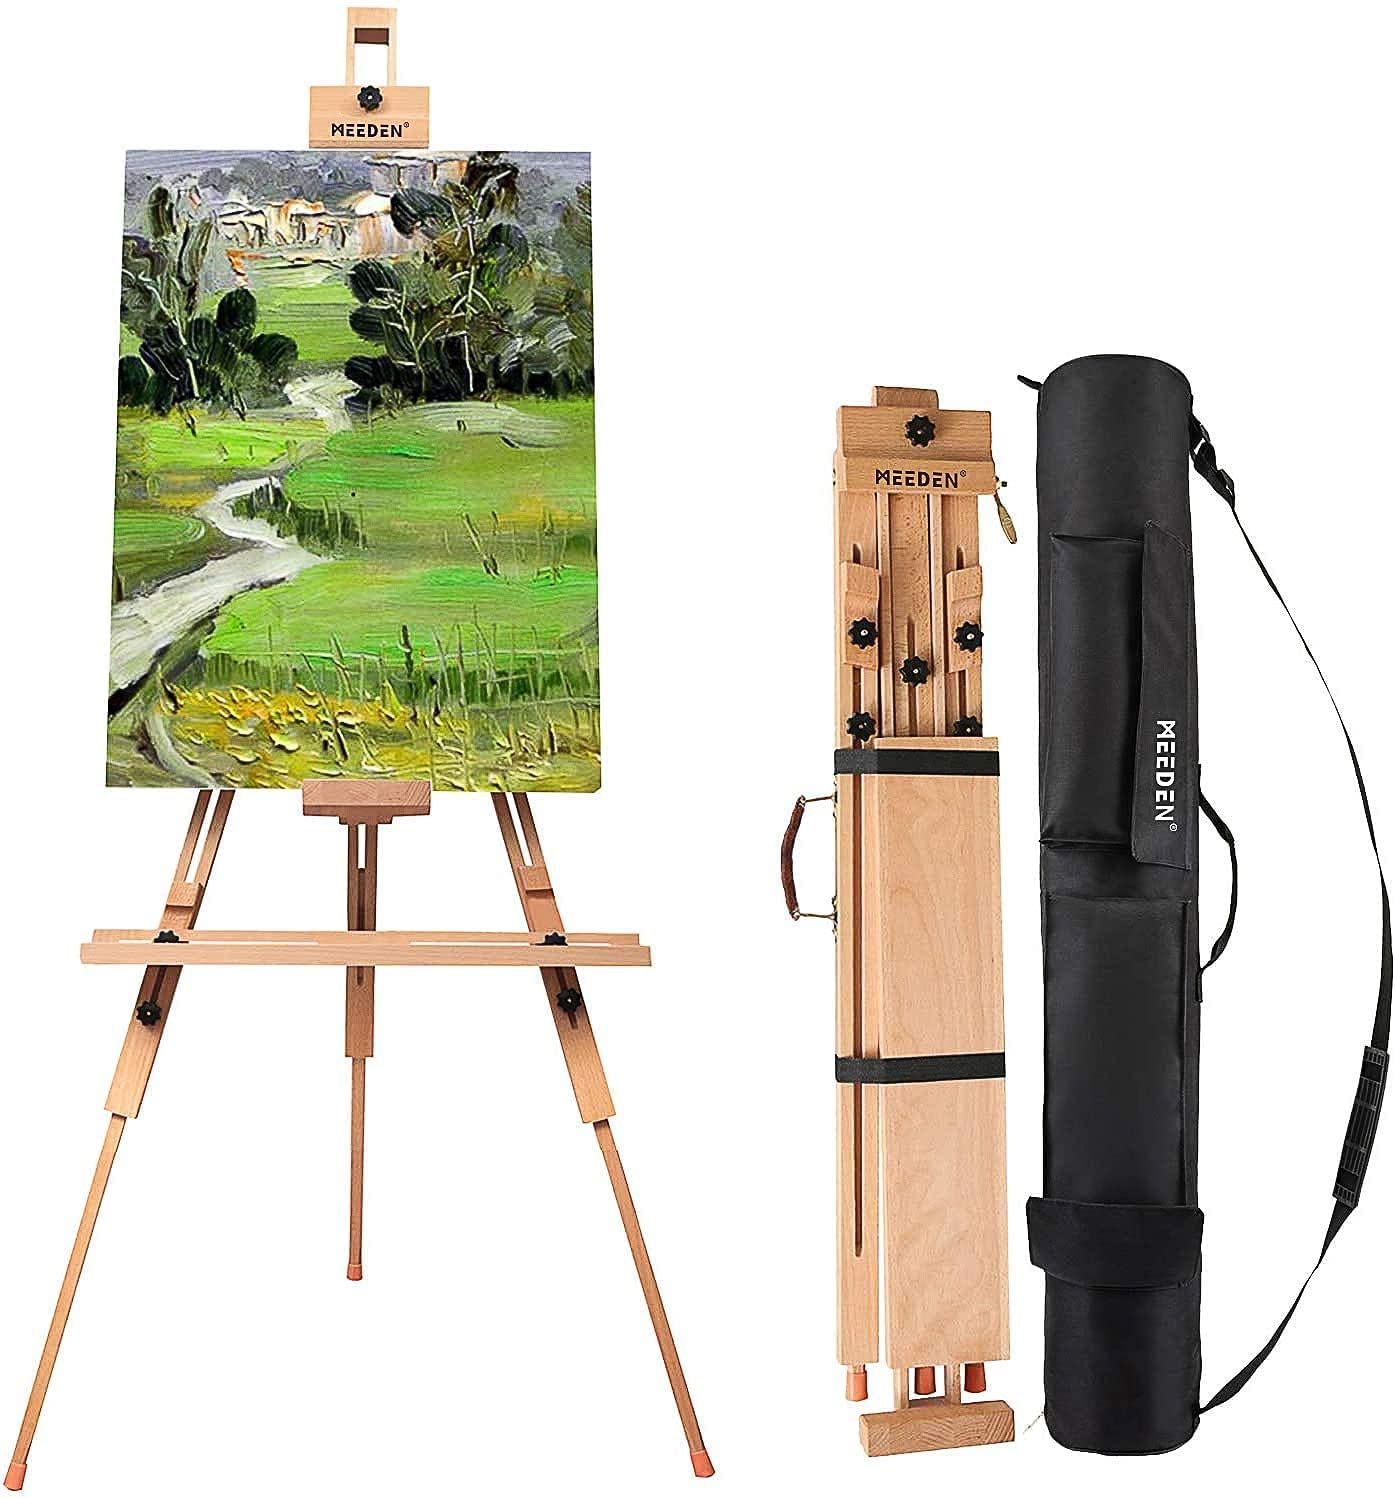 MEEDEN Tripod Field Painting Easel with Carrying Case [...]